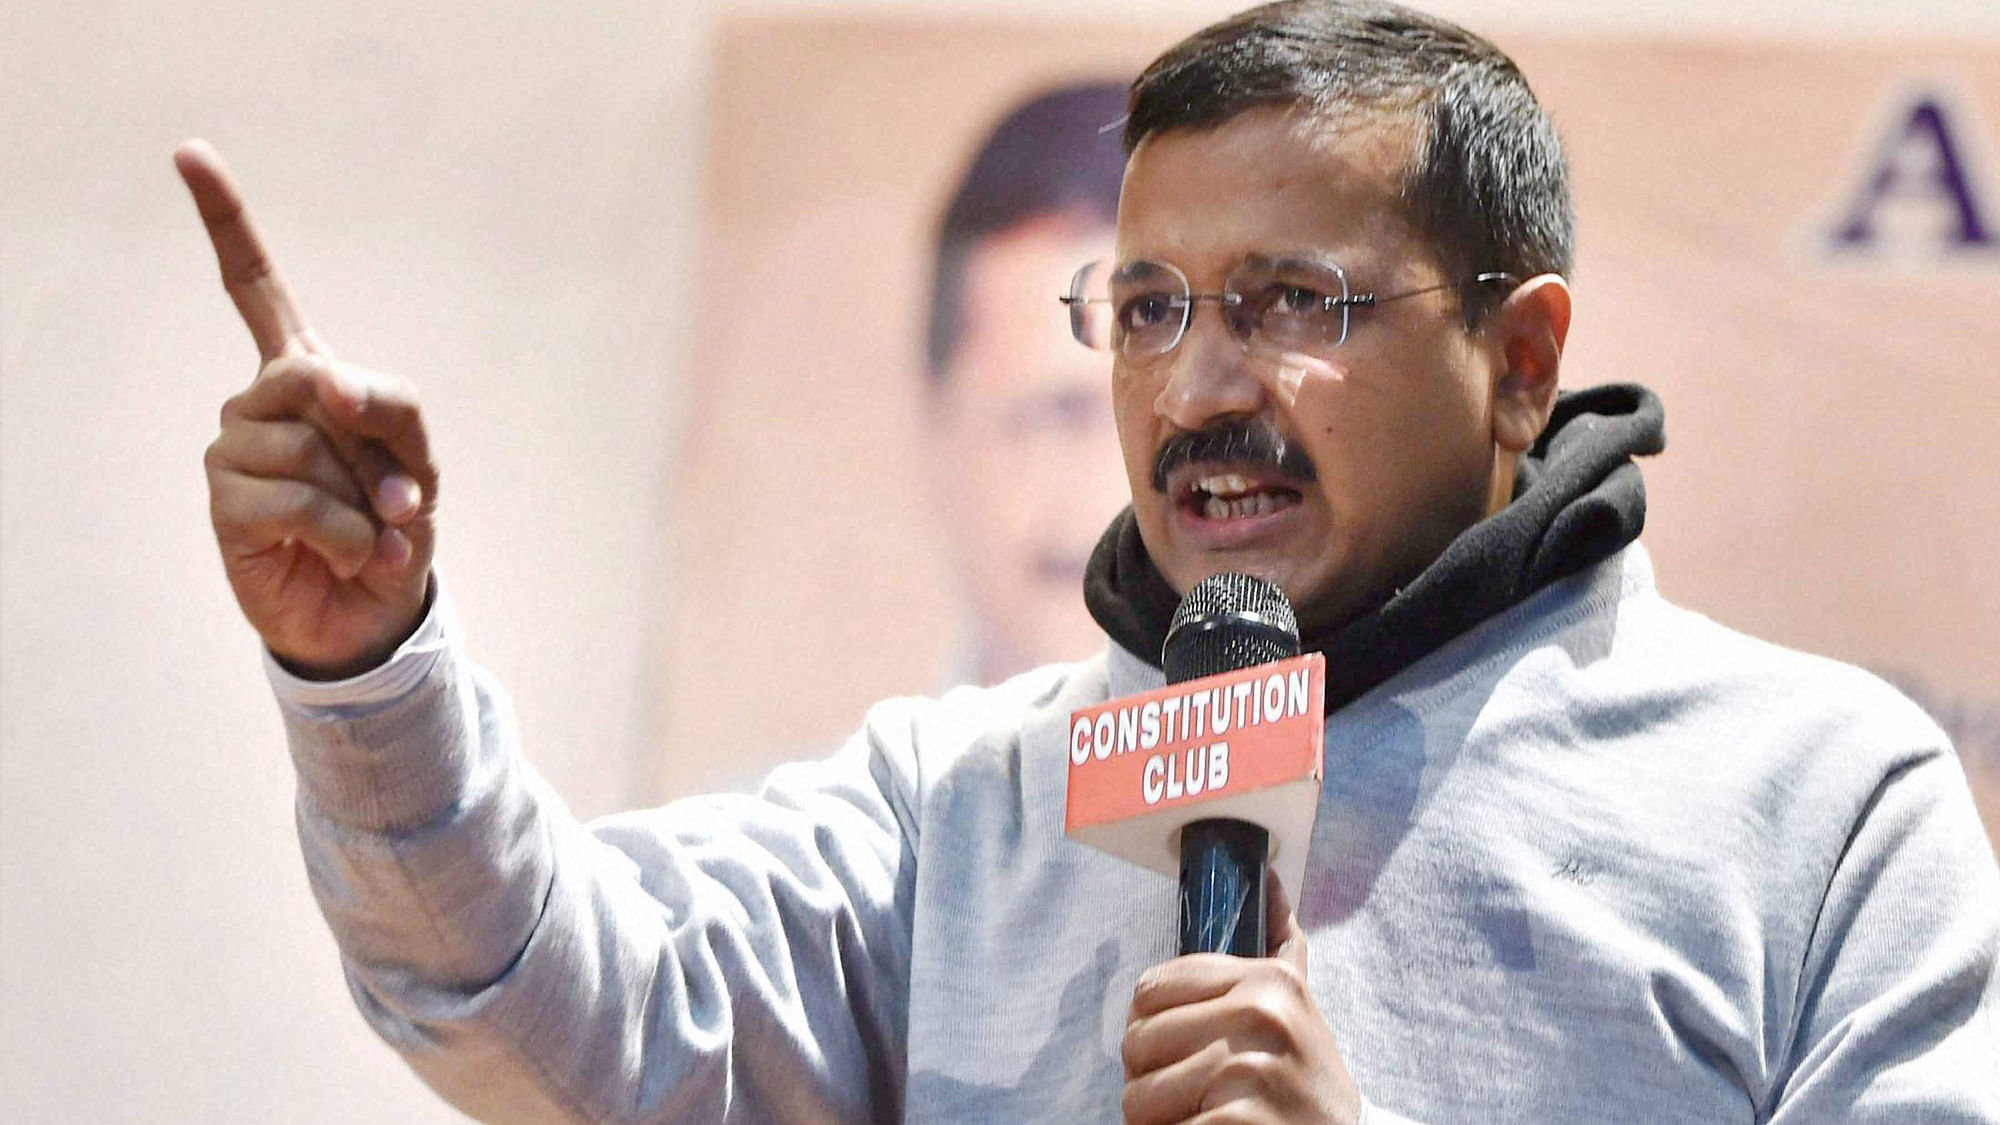   Kejriwal said that there was “mass anger” in India over the decision to allow the JIT to visit the Pathankot base. (Photo: Reuters)